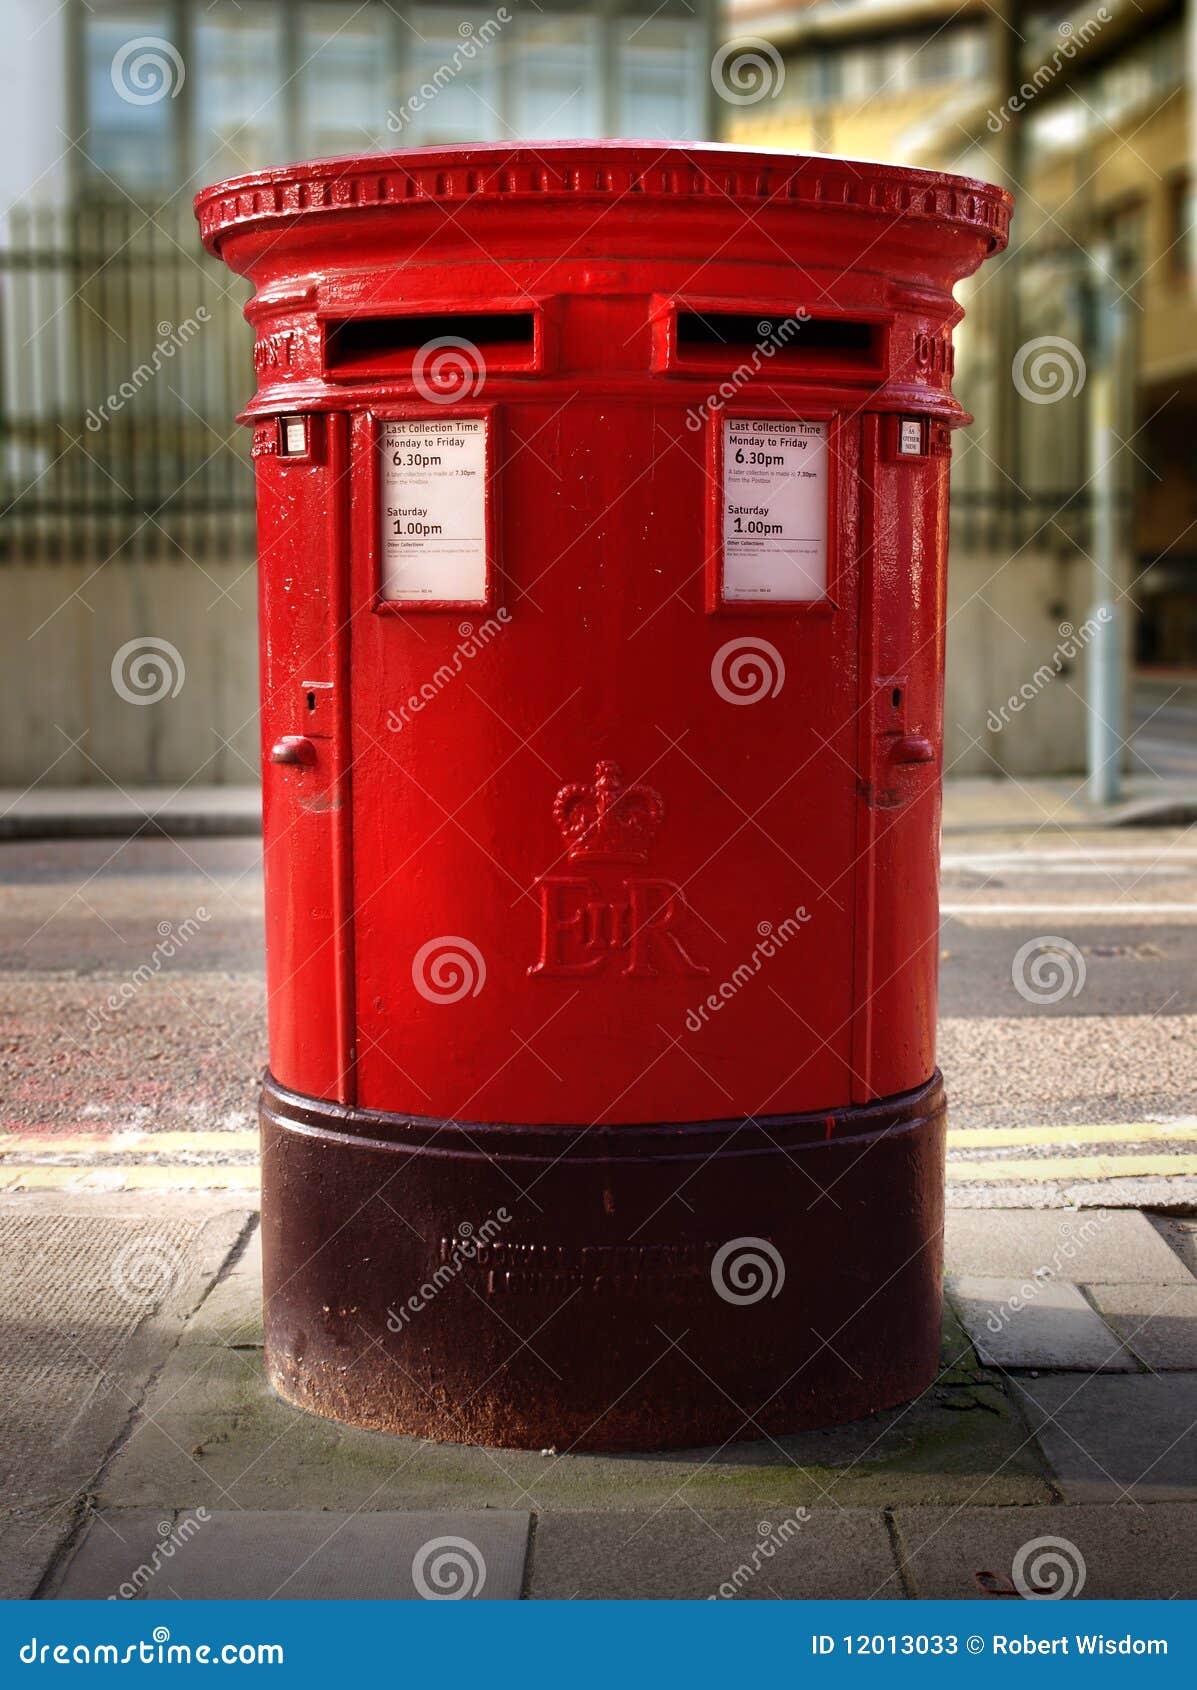 British Double Post Office Box Stock Image - Image of england, britain:  12013033